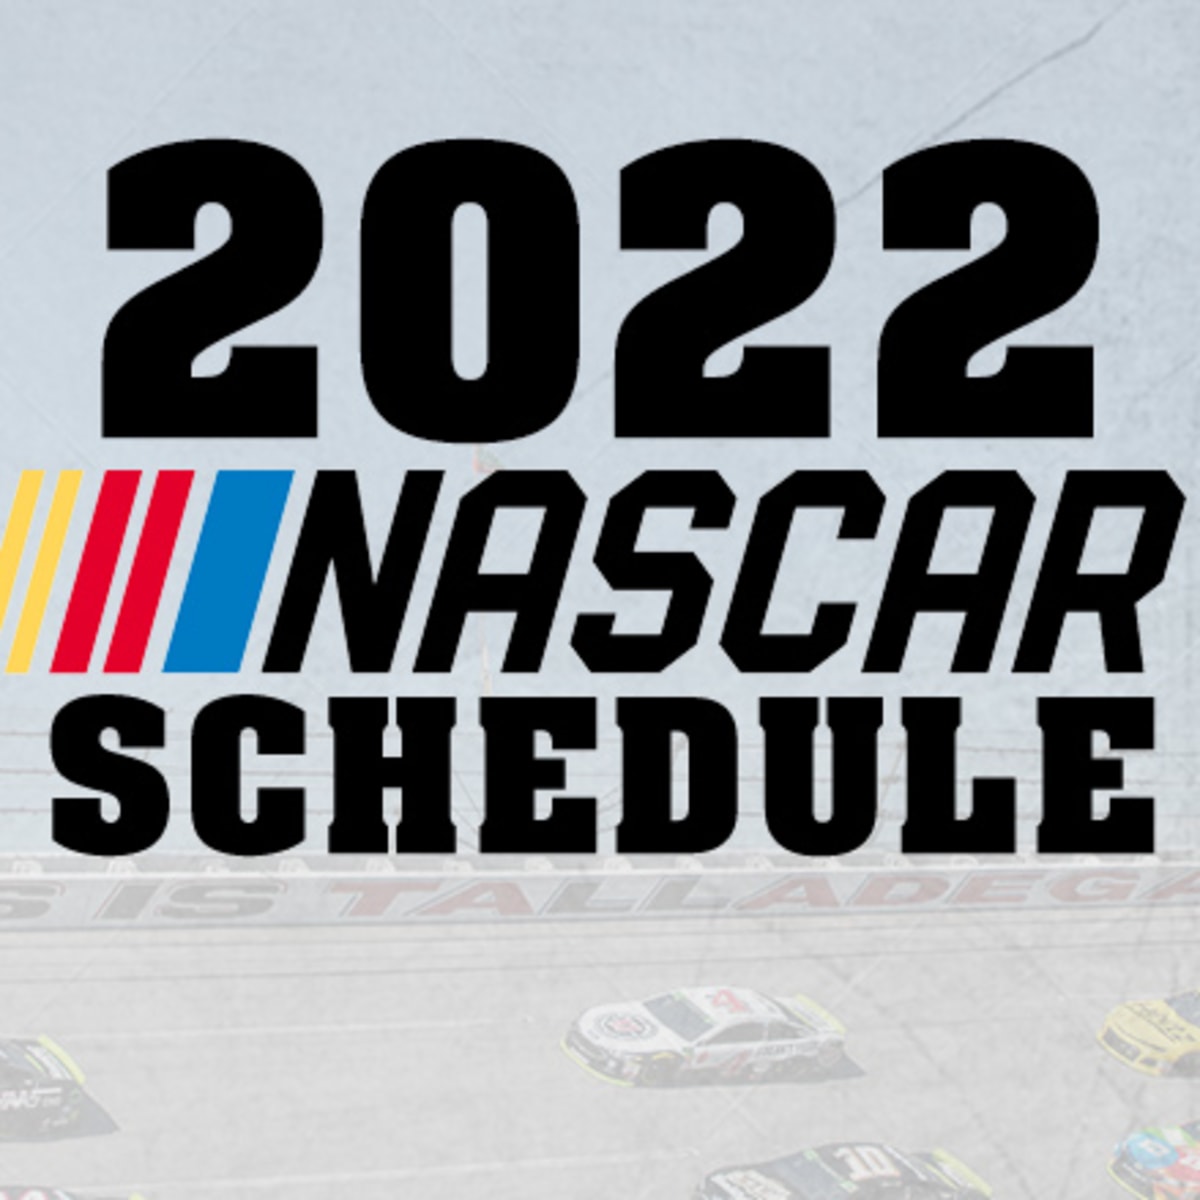 Monster Energy Nascar Schedule 2022 2022 Nascar Schedule: Nascar Cup Series - Athlonsports.com | Expert  Predictions, Picks, And Previews